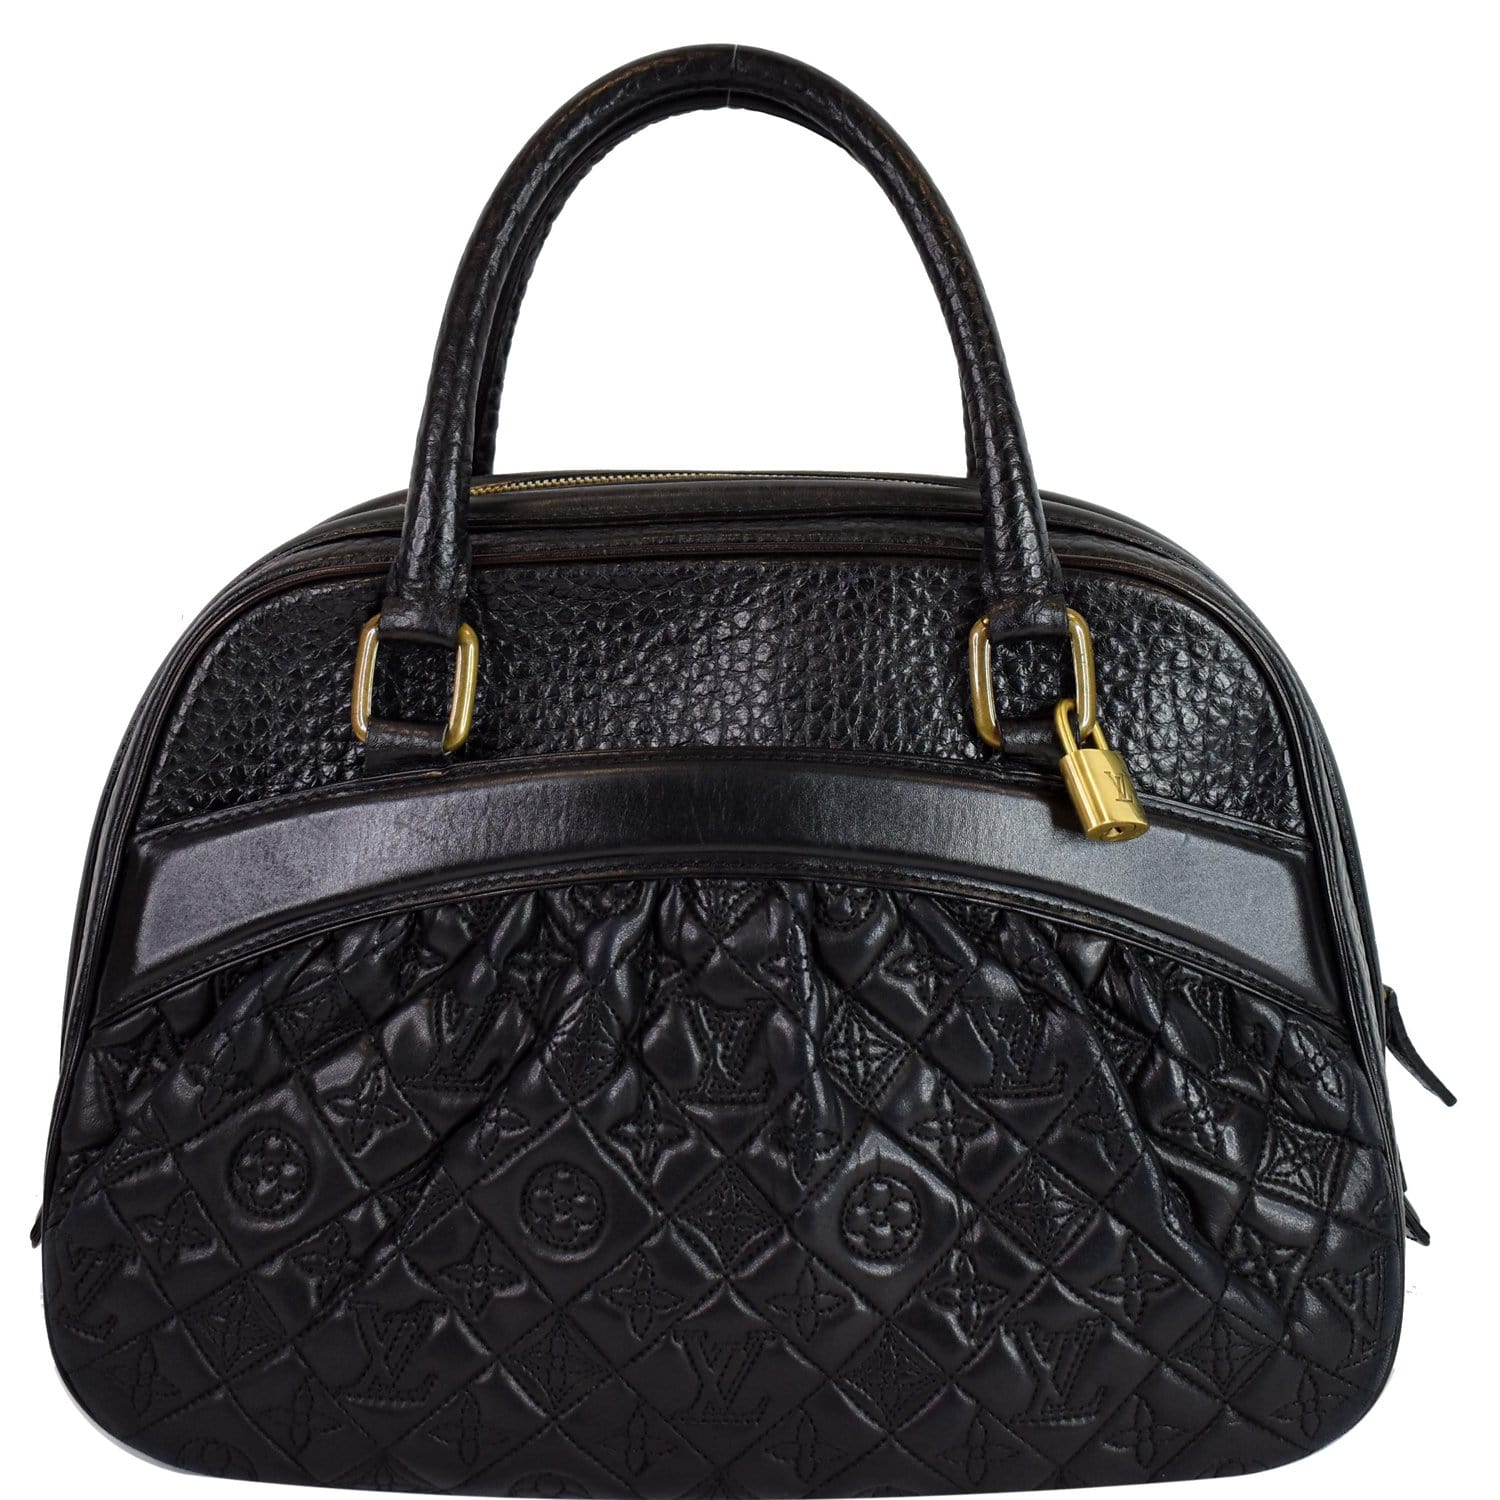 Louis Vuitton Black Quilted Bags & Handbags for Women, Authenticity  Guaranteed